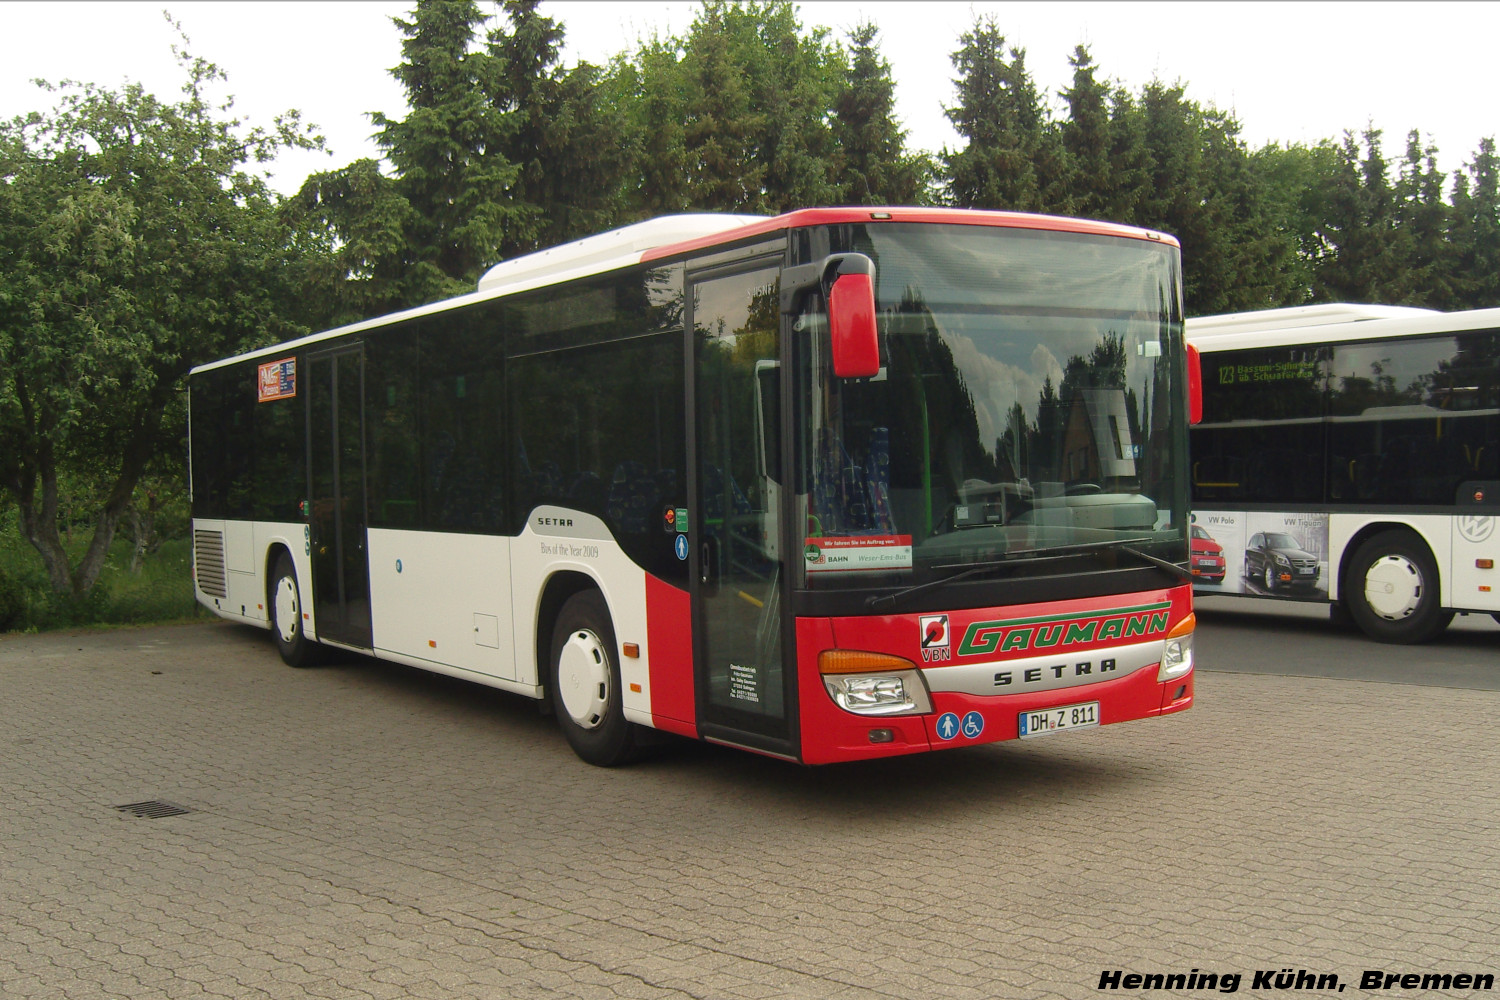 Setra S415 NF #DH-Z 811